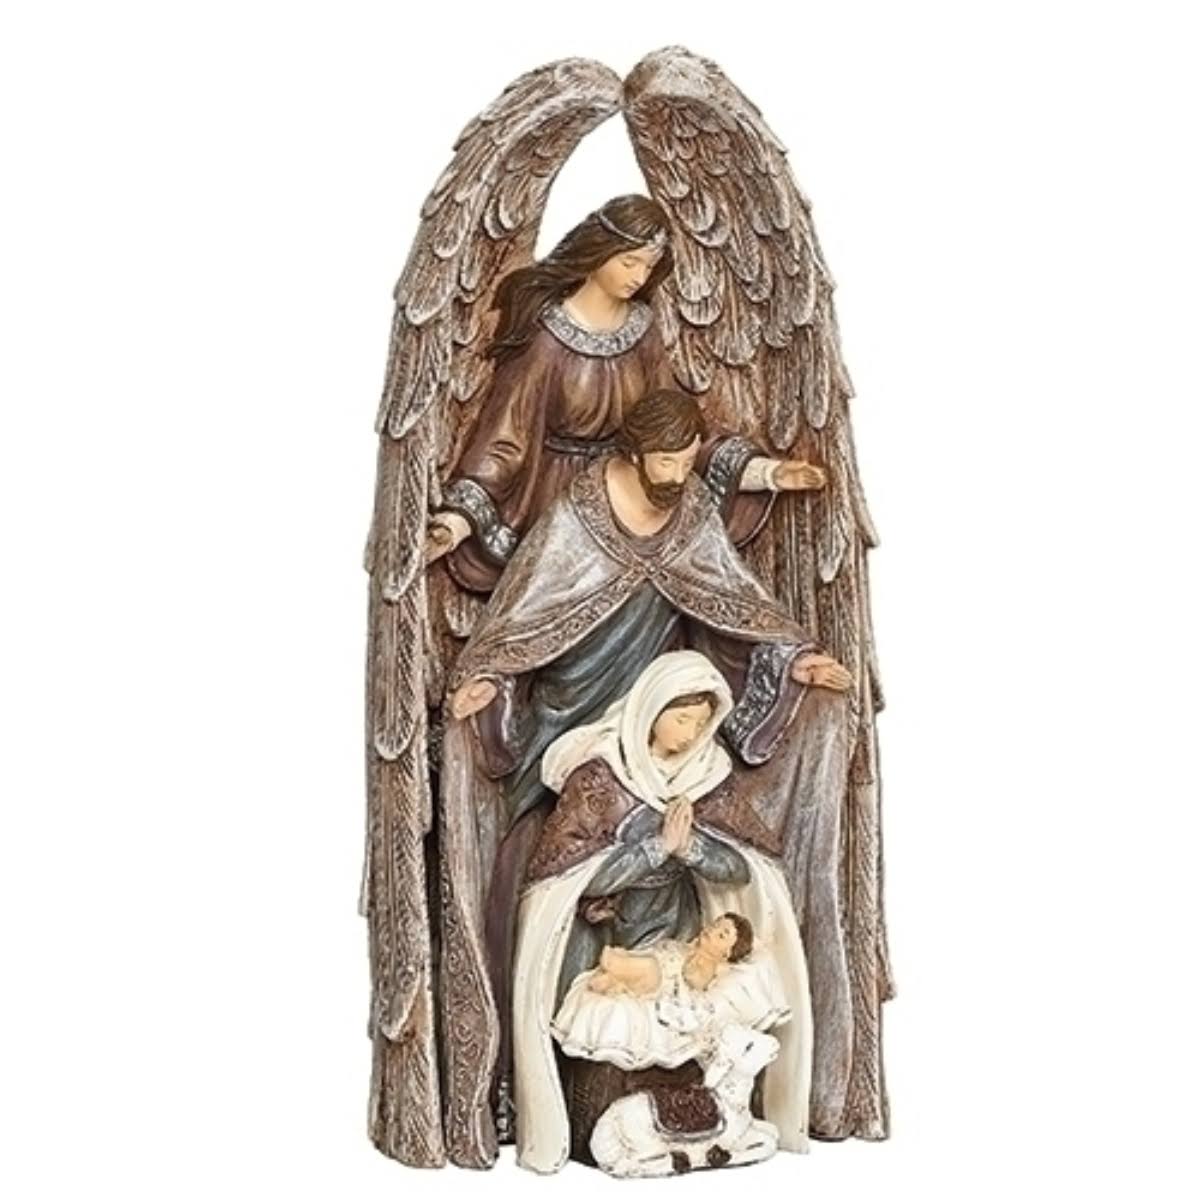 Roman Collectible and Figurine Nesting Holy Family Nativity Set One-Size